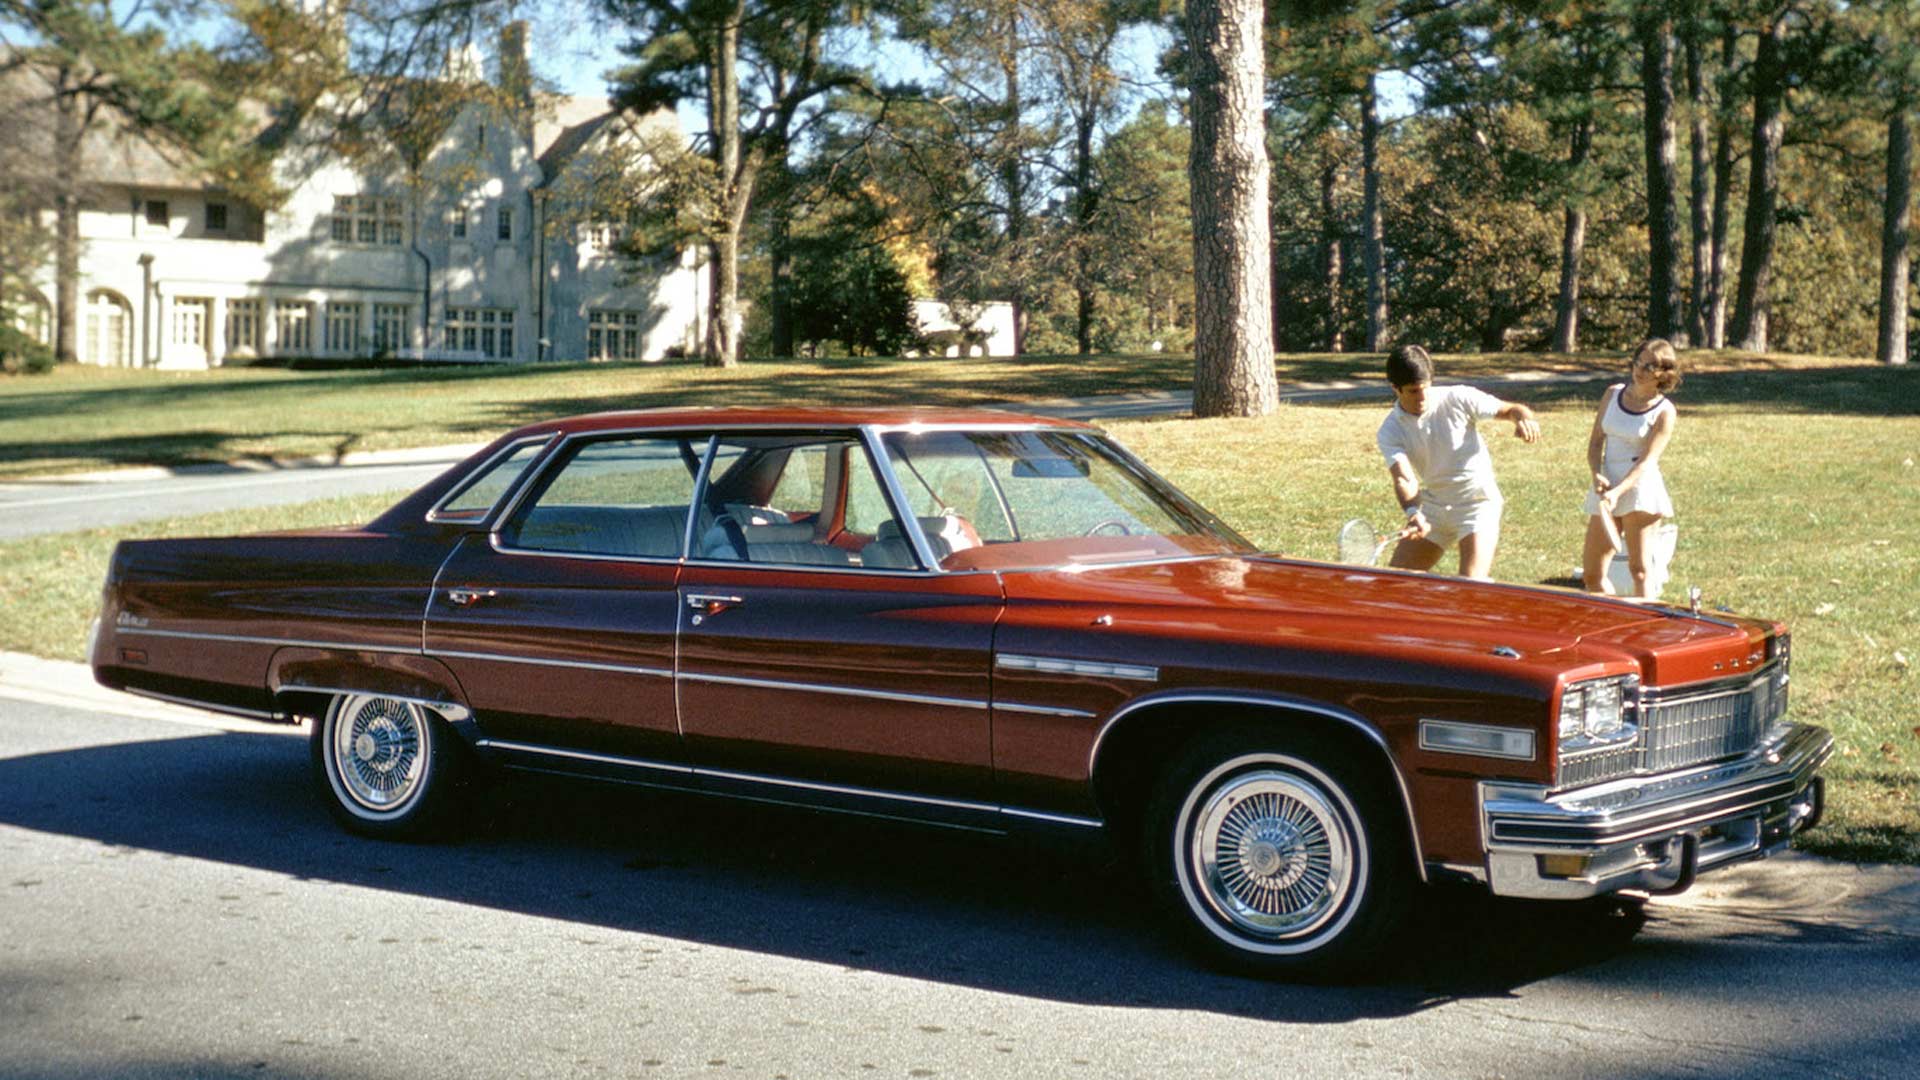 1975 Buick Electra 225 – 233.7 inches